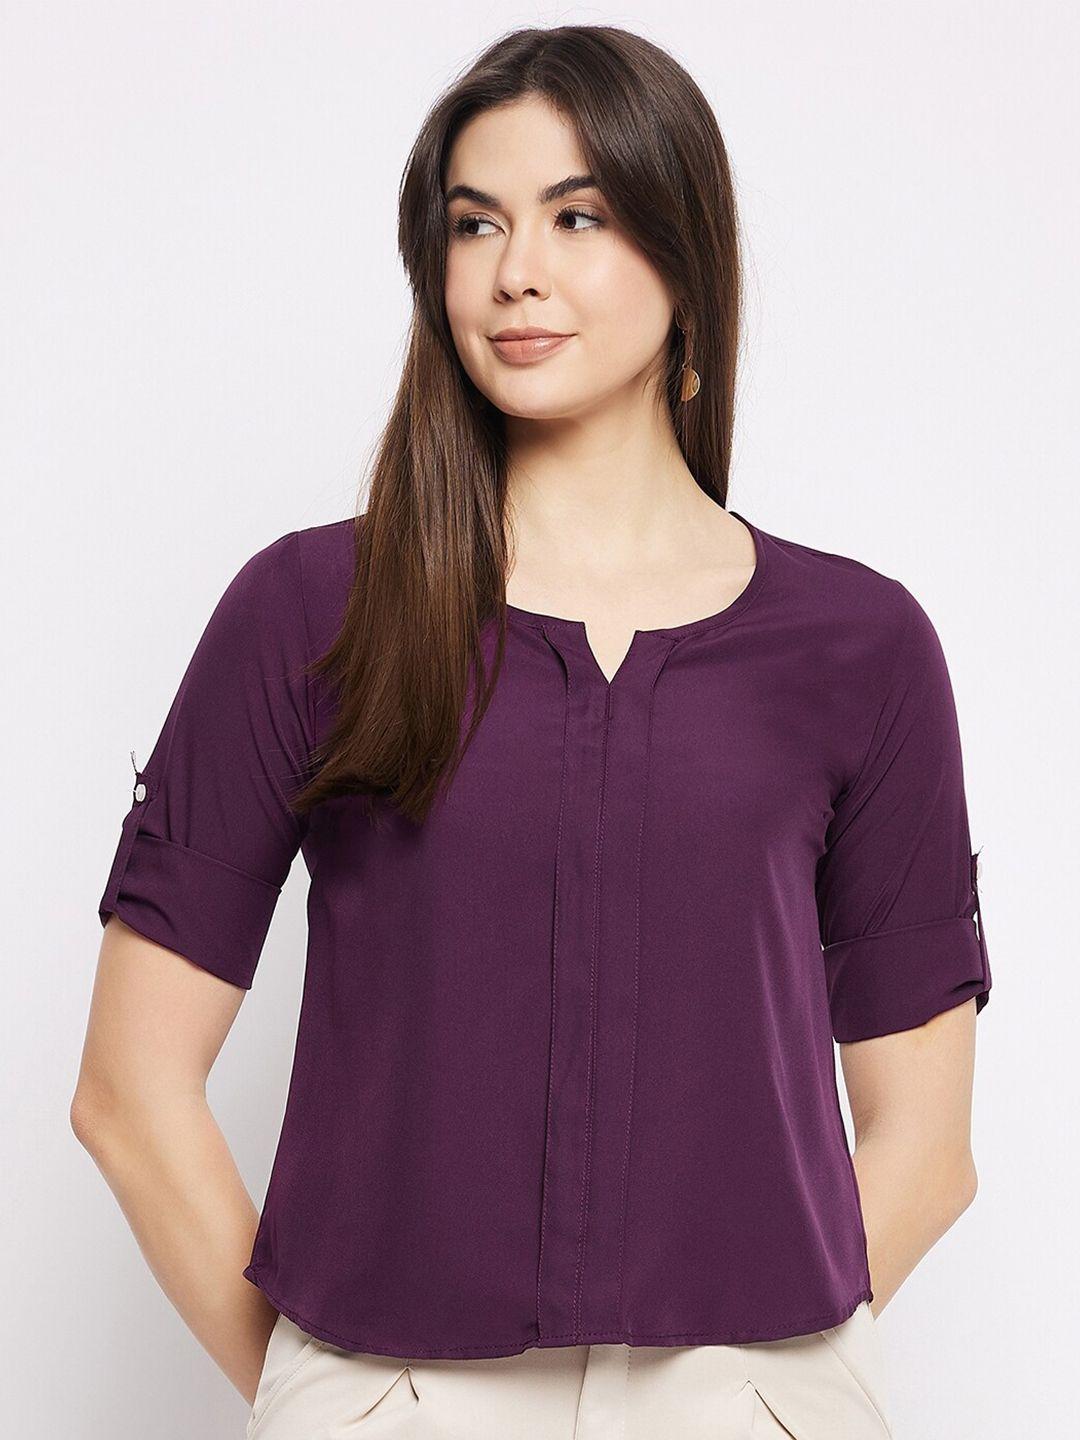 mayra notch neck roll-up sleeves top